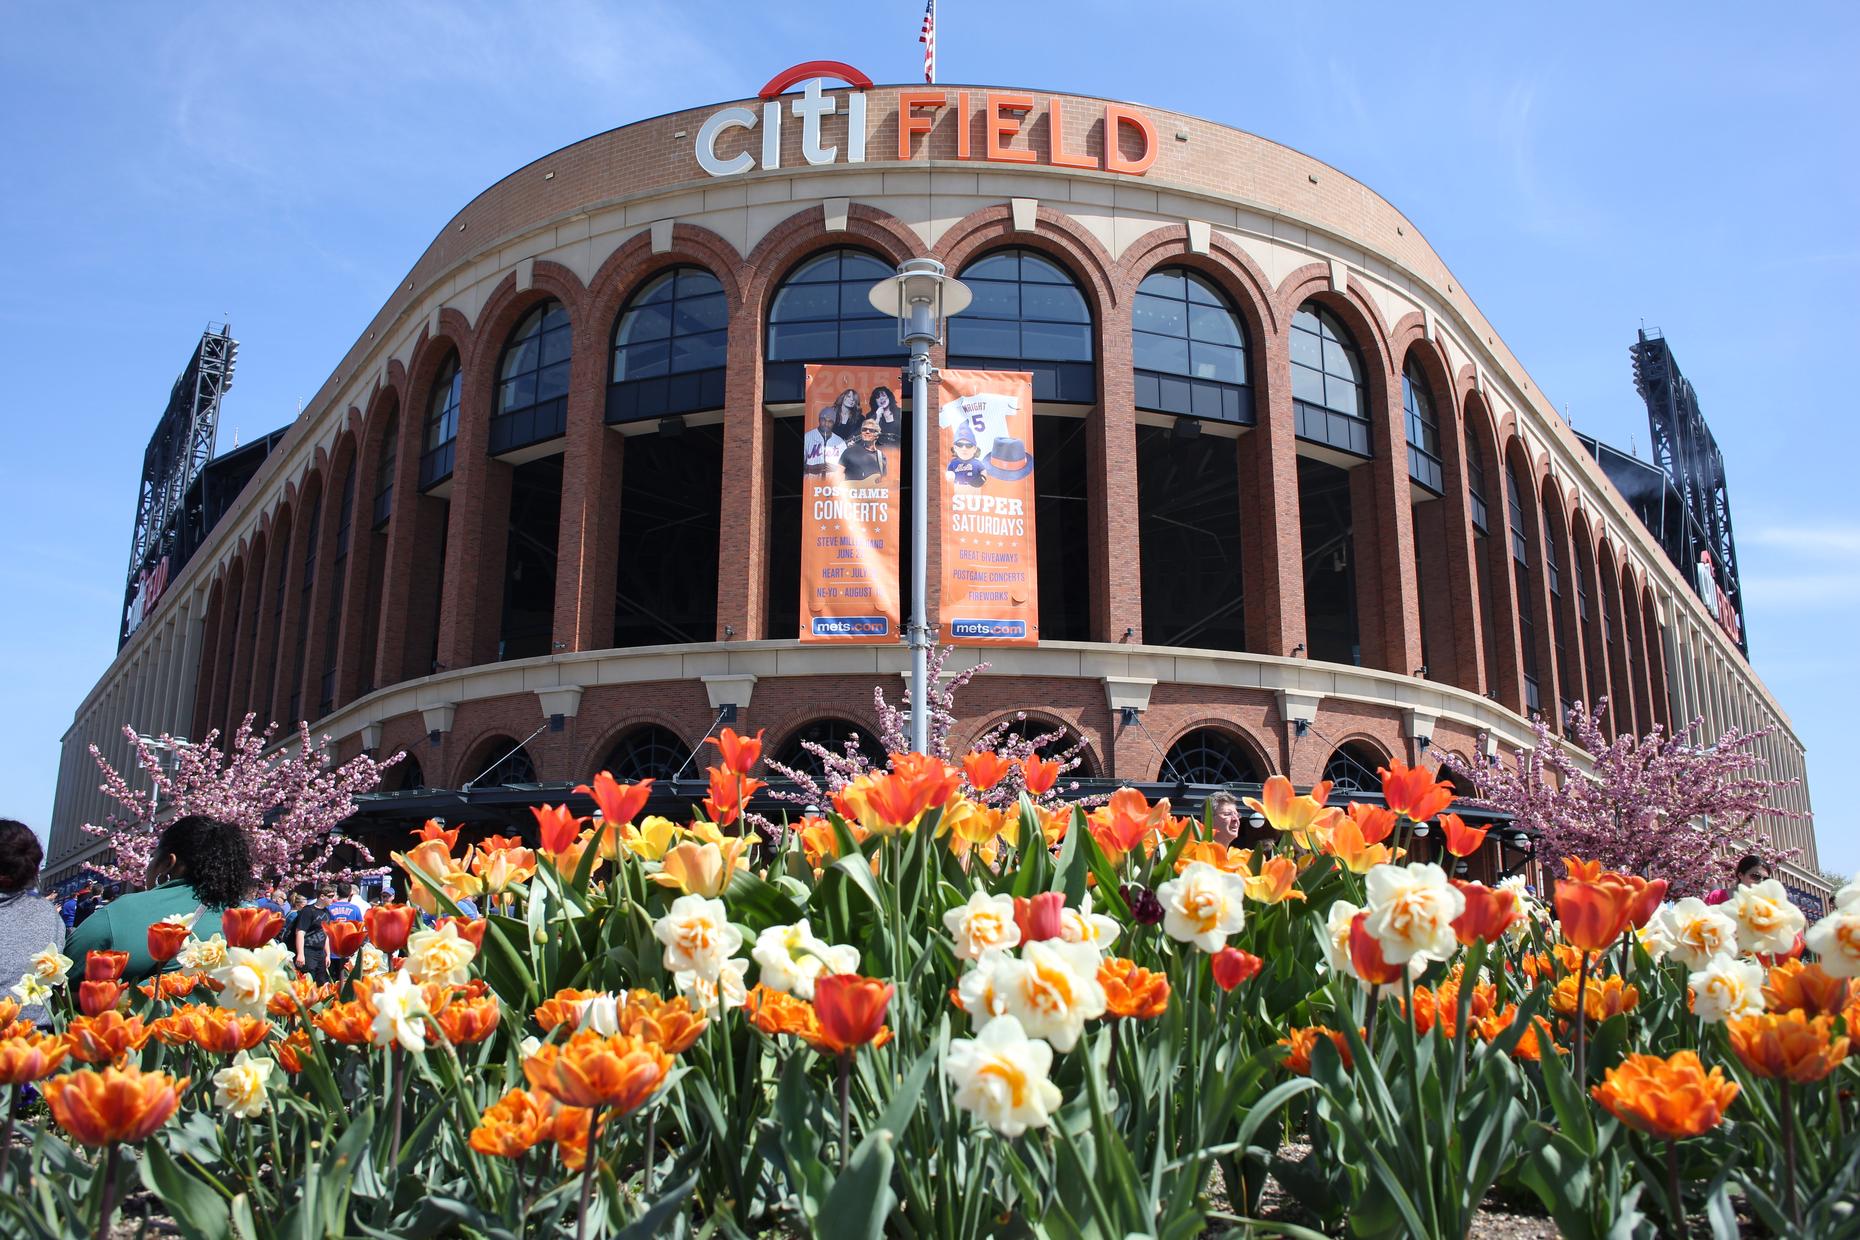 Opening day at Citi Field brings new eats and attractions for Mets fans